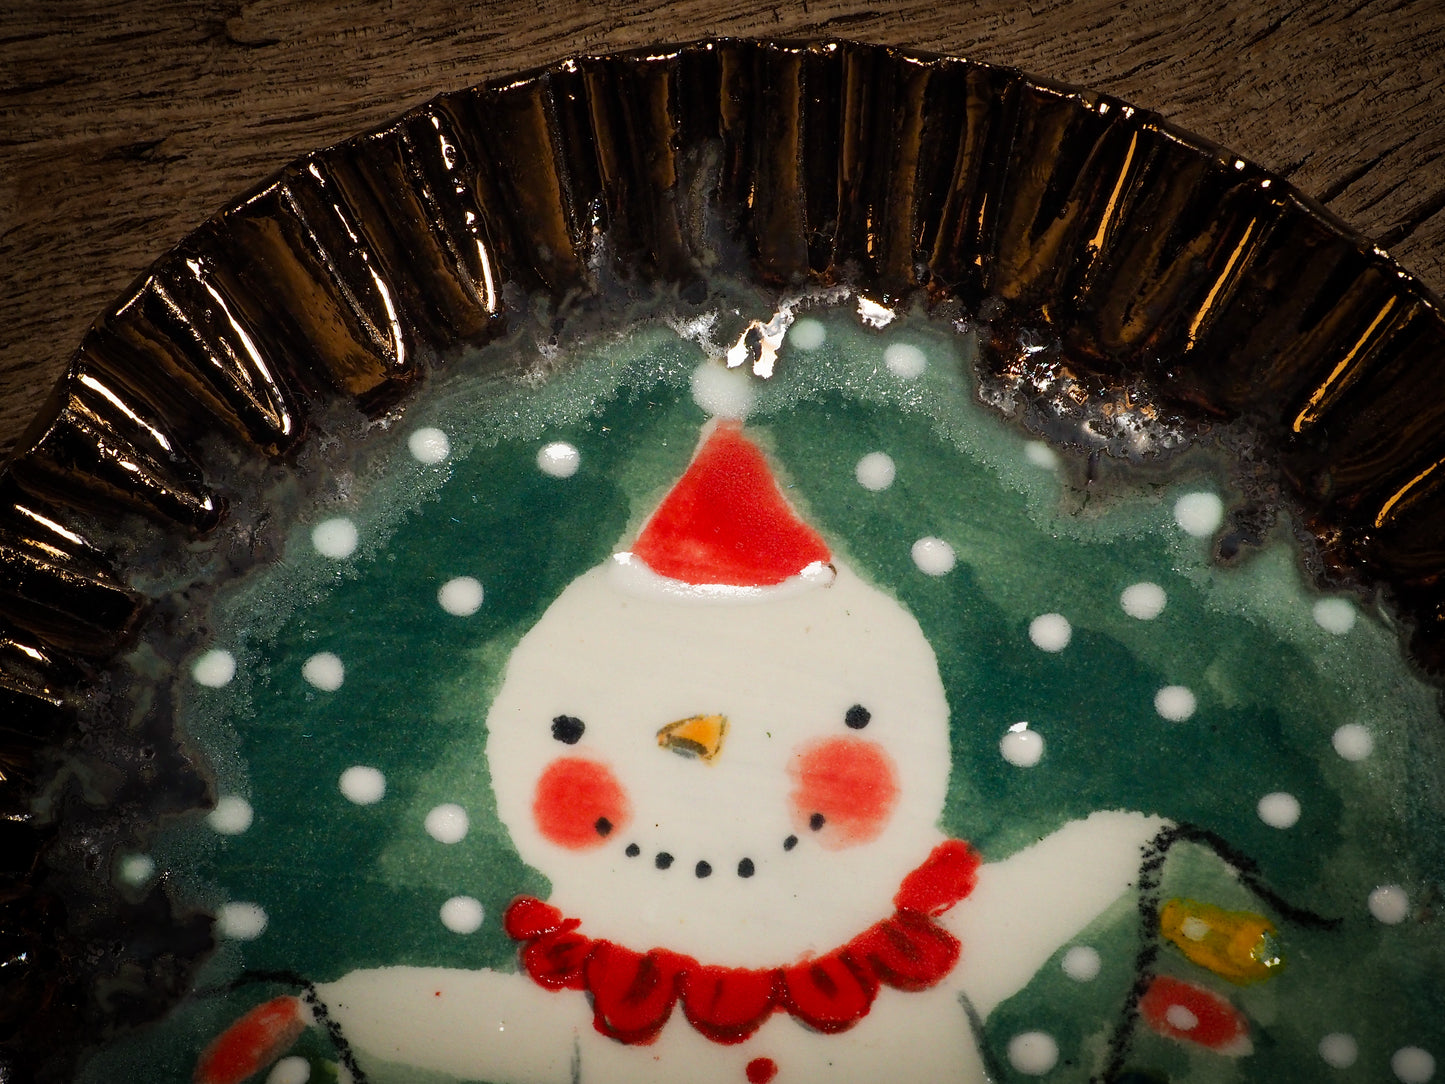 HOLIDAY CAKE PLATE #16